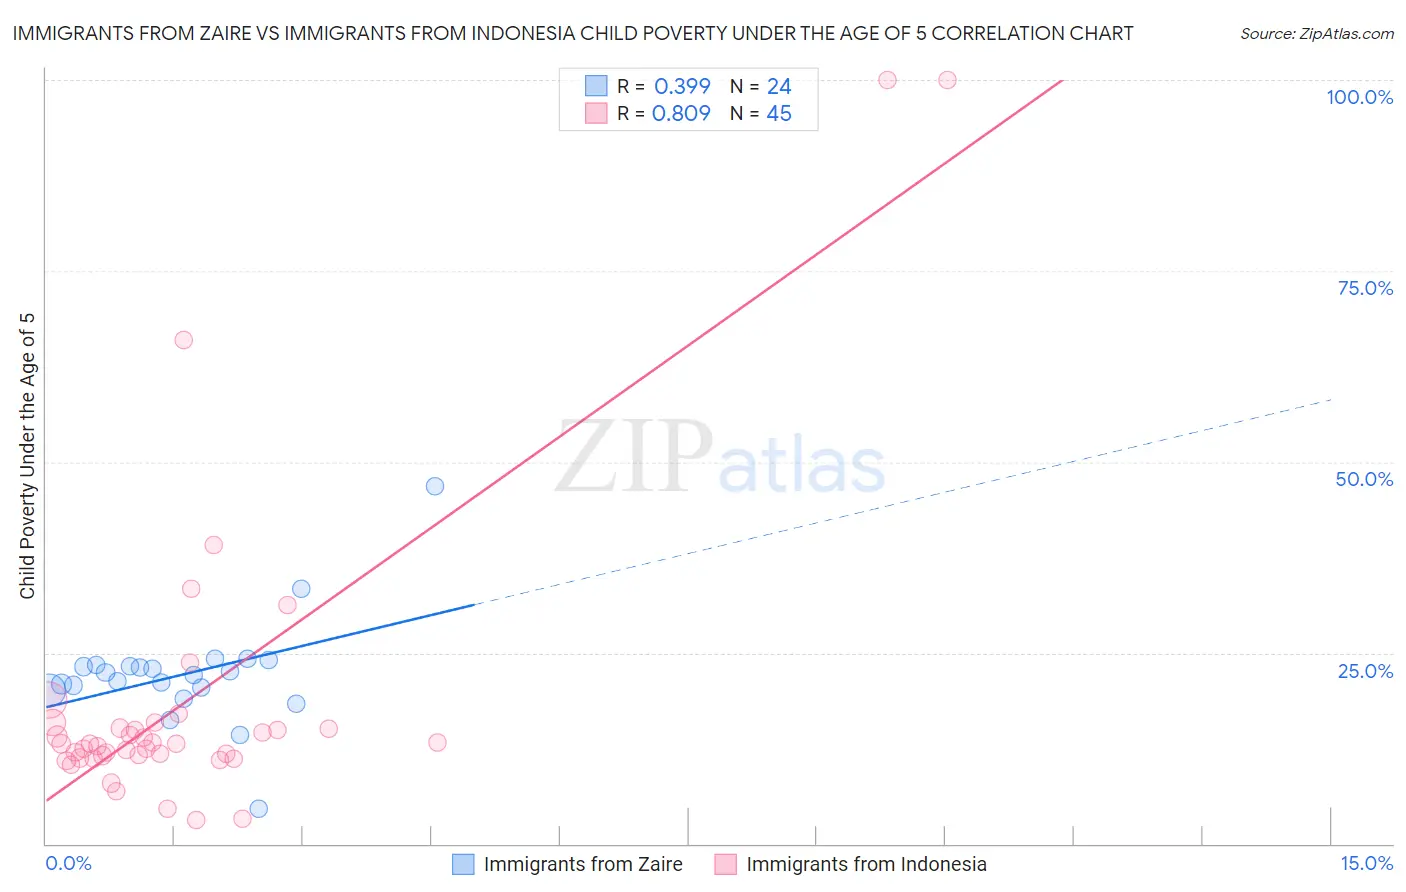 Immigrants from Zaire vs Immigrants from Indonesia Child Poverty Under the Age of 5